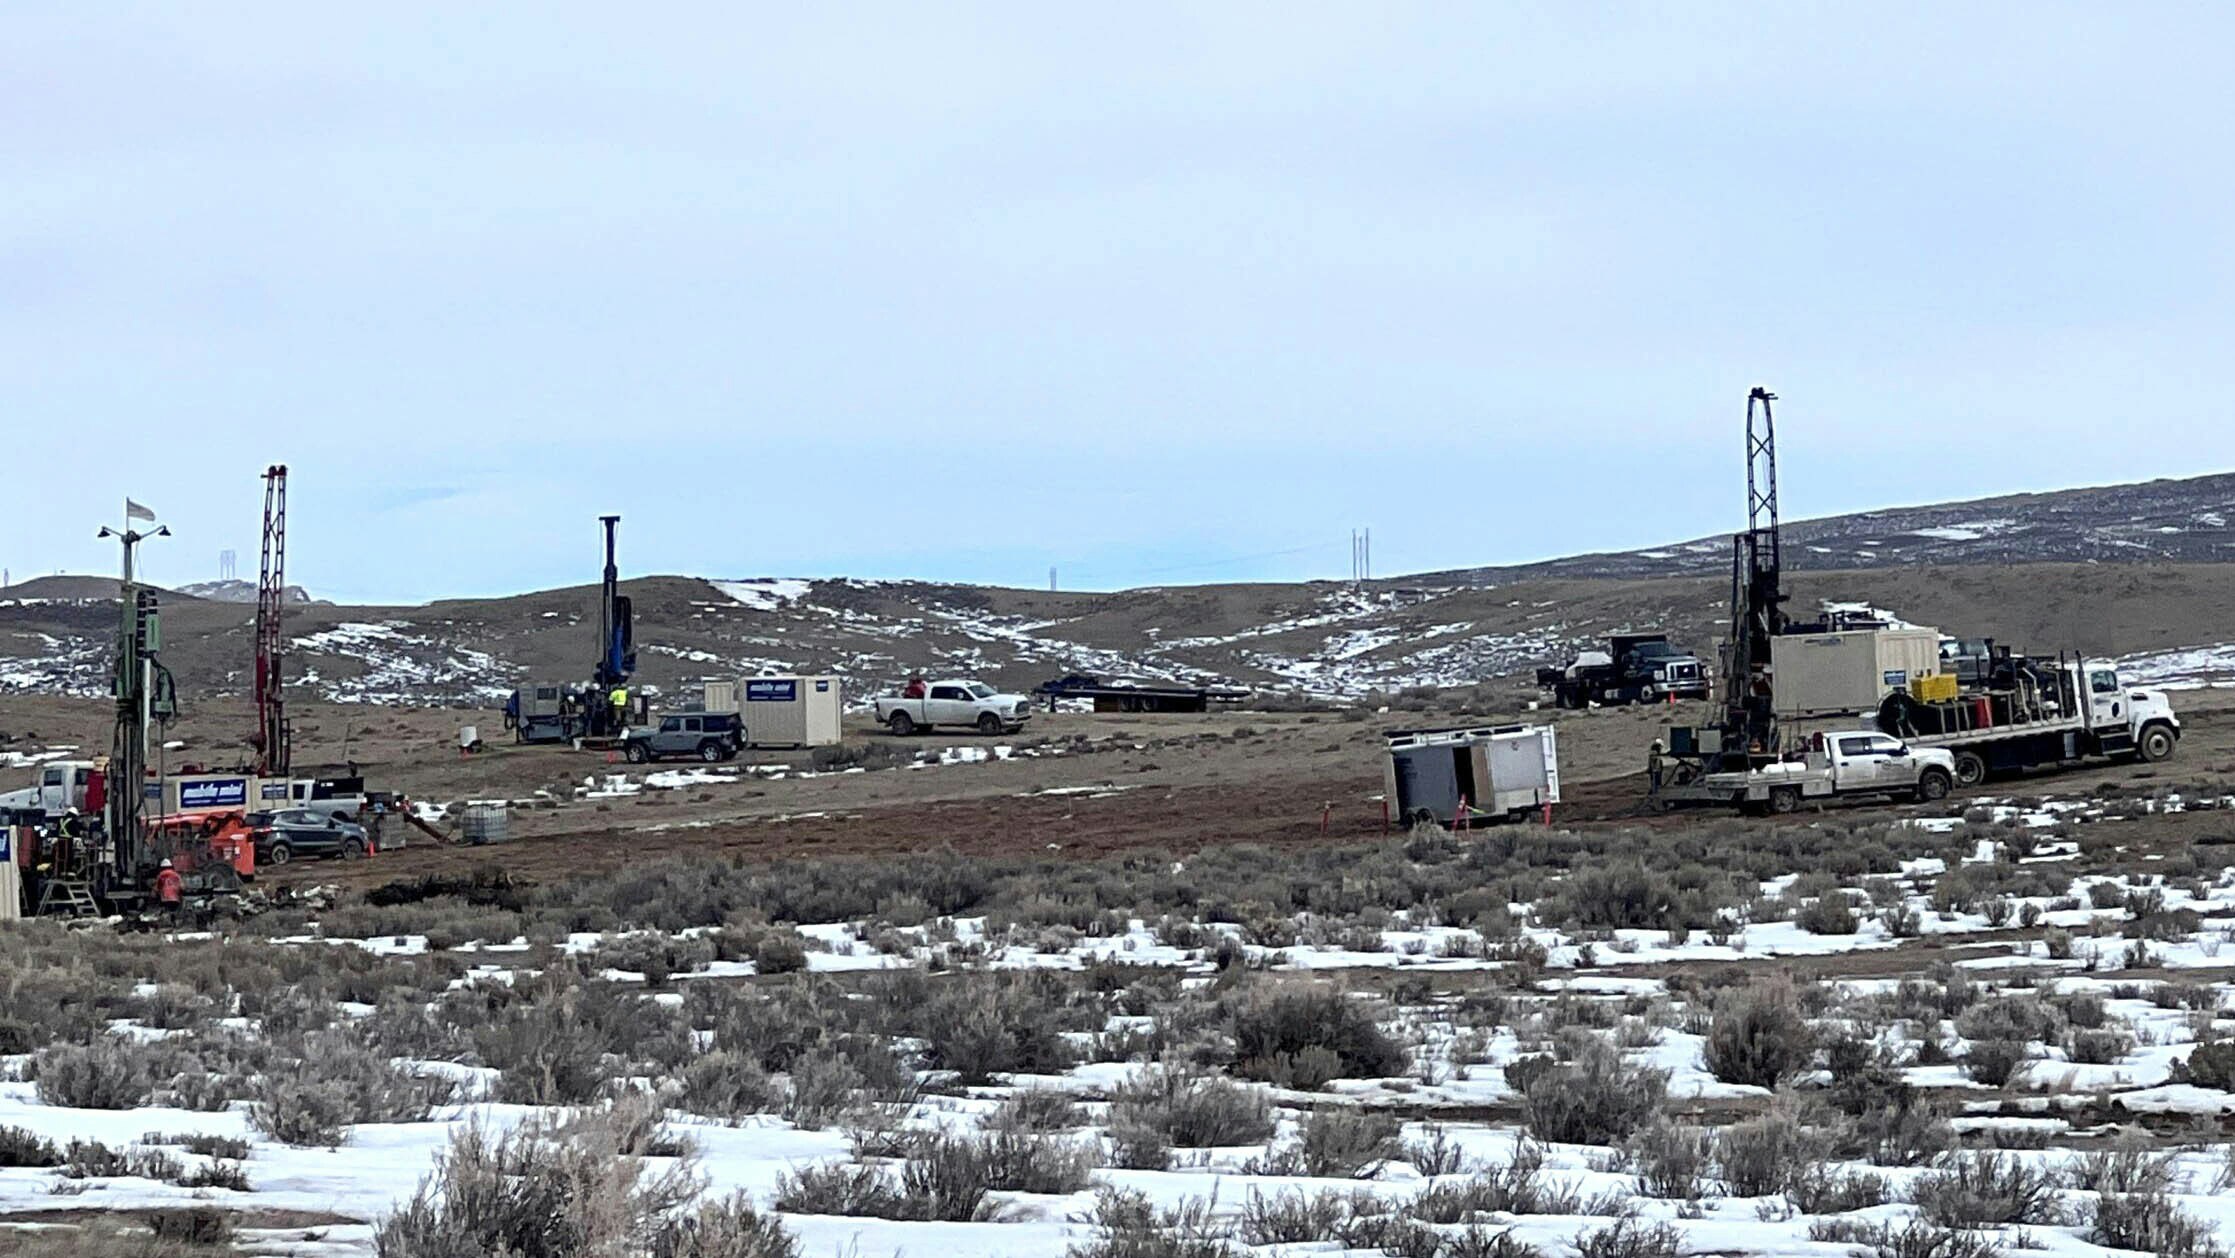 Equipment is staged and ready to start building non-reactor infrastructure for the TerraPower Natrium nuclear power plant near Kemmerer, Wyoming.